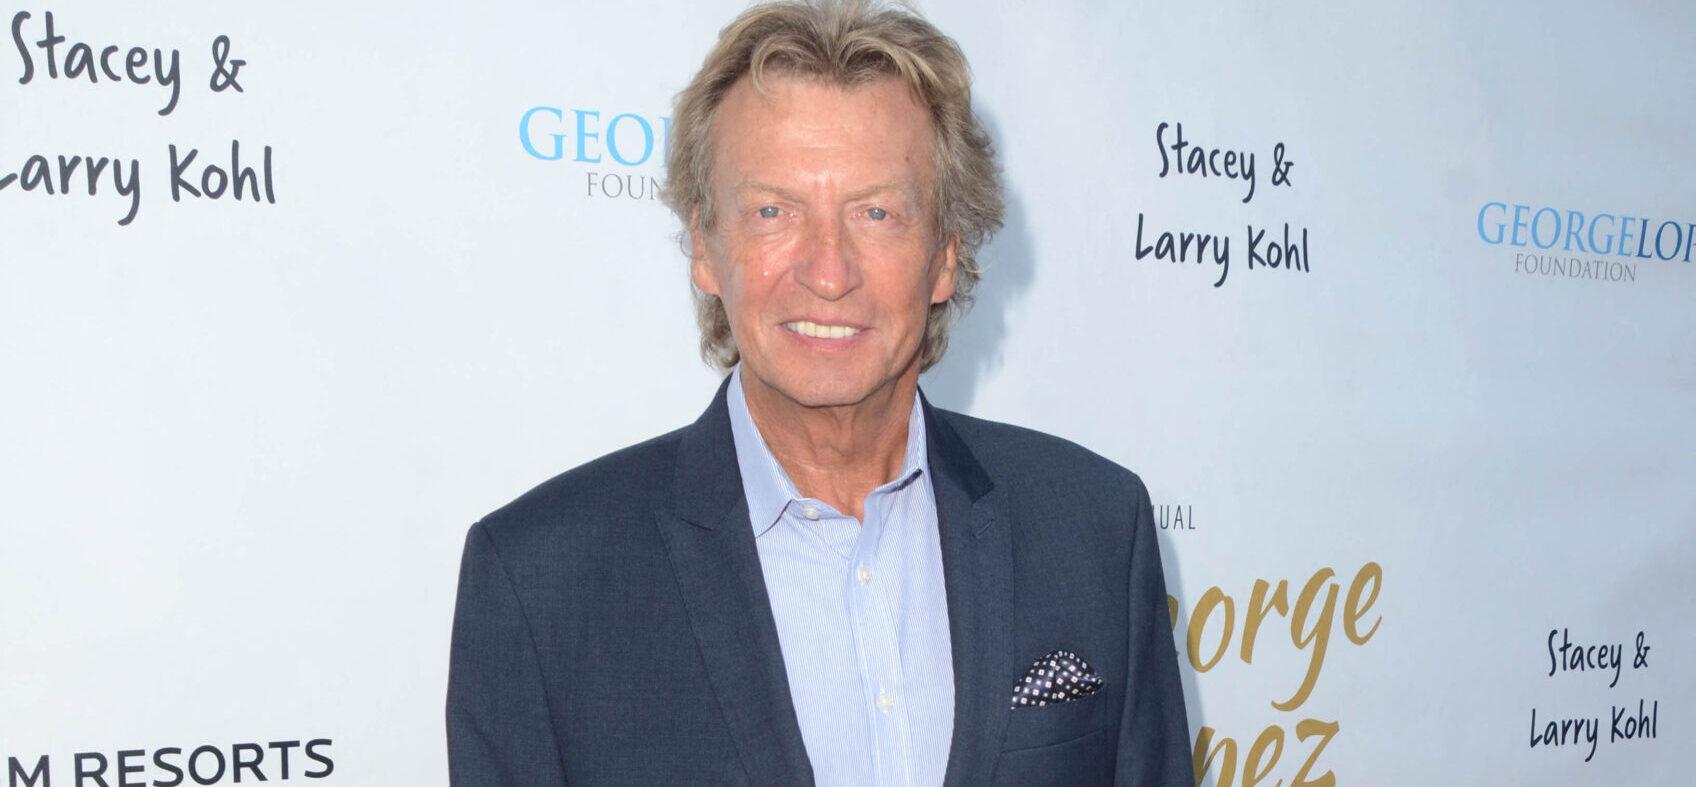 American Idol’s Nigel Lythgoe Sued For Another Alleged Sexual Assault